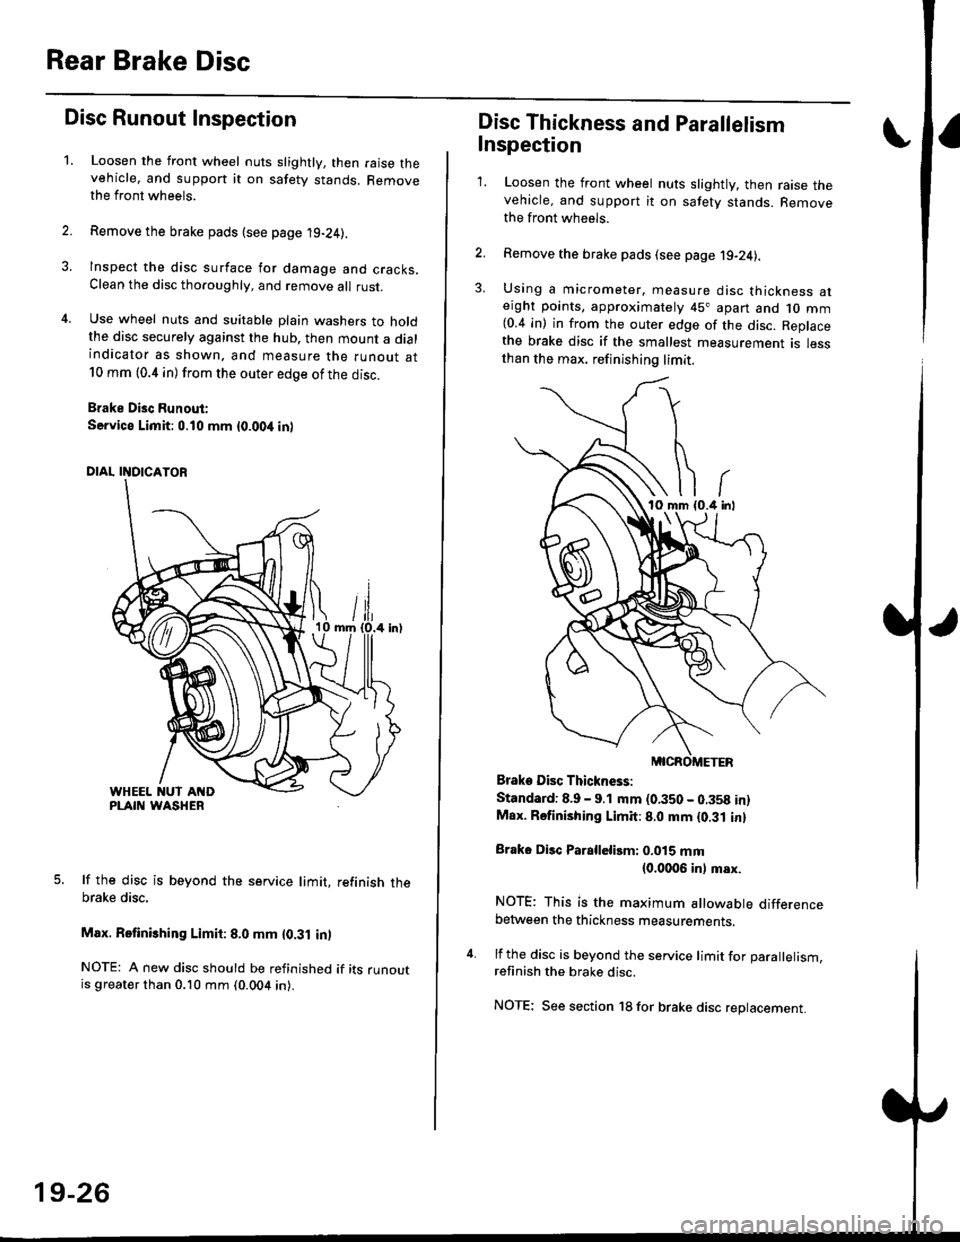 HONDA CIVIC 1996 6.G Service Manual Rear Brake Disc
Disc Runout Inspection
1.Loosen the front wheel nuts slightly, then raise thevehicle, and suppon it on safety stands. Removethe front wheels.
Remove the brake pads (see page 19-24).
In